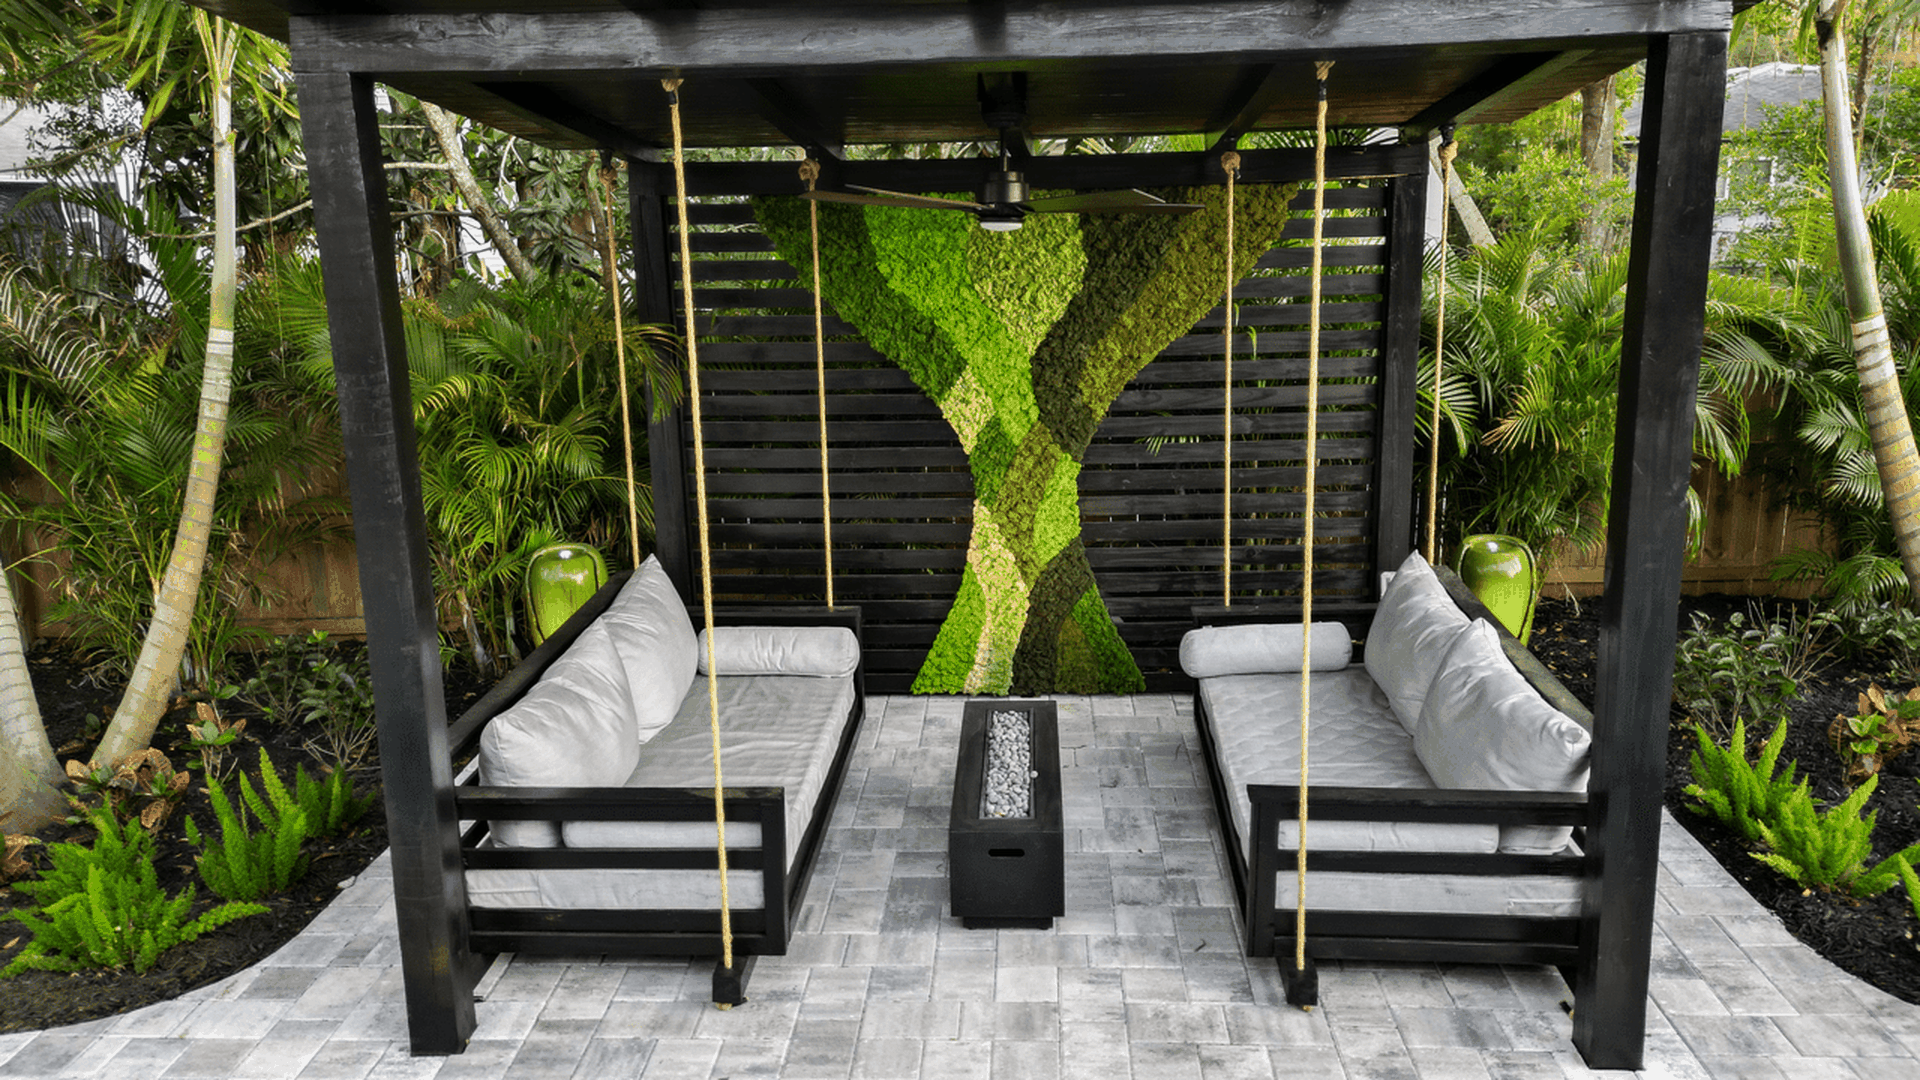 Outdoor seating space with a moss art wall